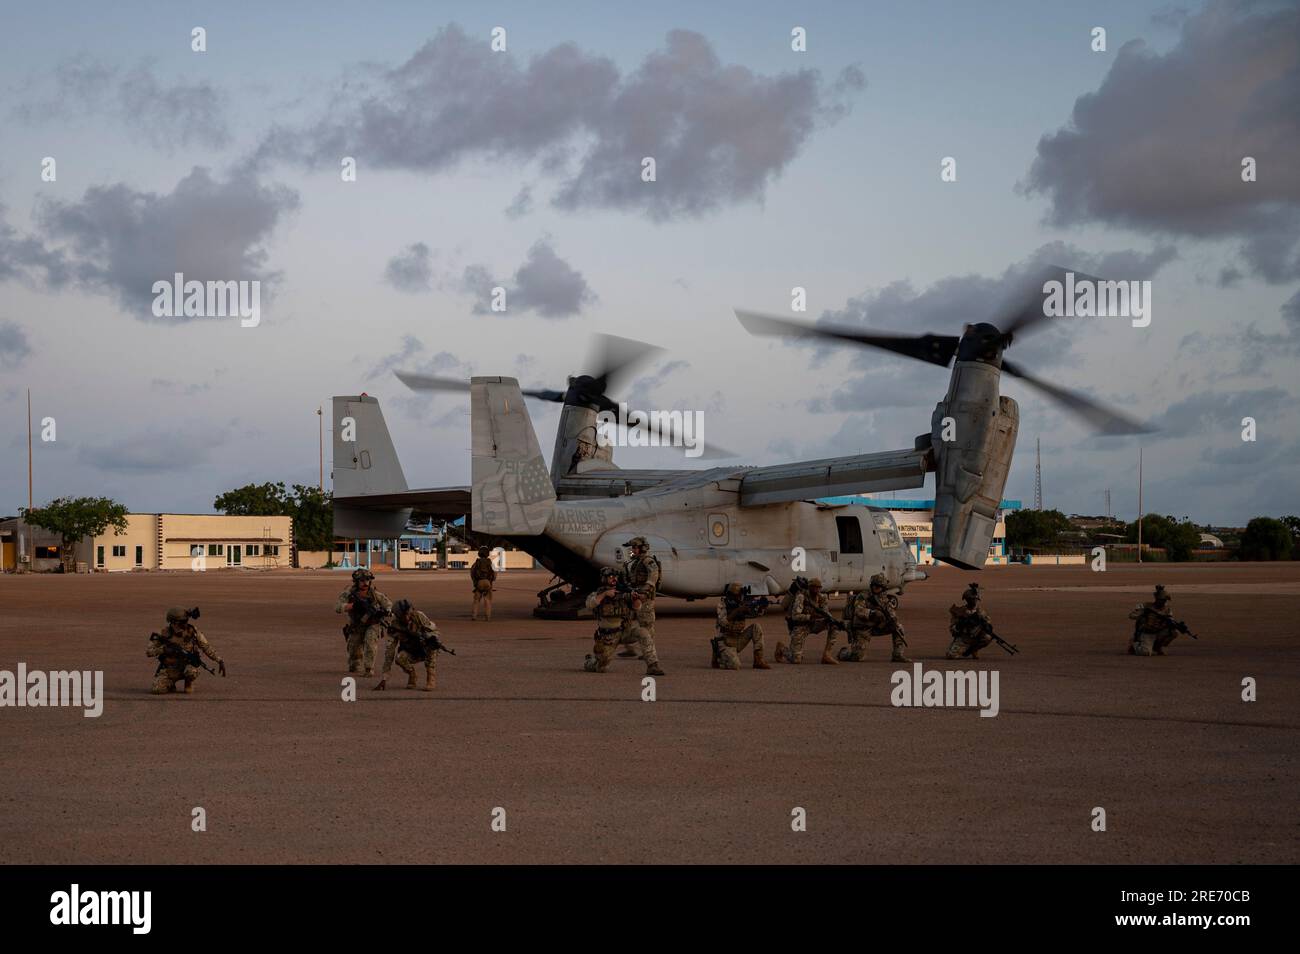 Obolus Javelin Commandos and U.S. Special Operations Forces practice tactics, training and procedures before boarding an MV-22 Osprey to conduct an operation at Kismayo, Somalia, June 12, 2023. U.S. forces provide remote advise and assist support to Somali National Army Danab Forces to increase regional security and stability in the Horn of Africa. (U.S. Air Force photo by Staff Sgt. Enrique Barcelo) Stock Photo